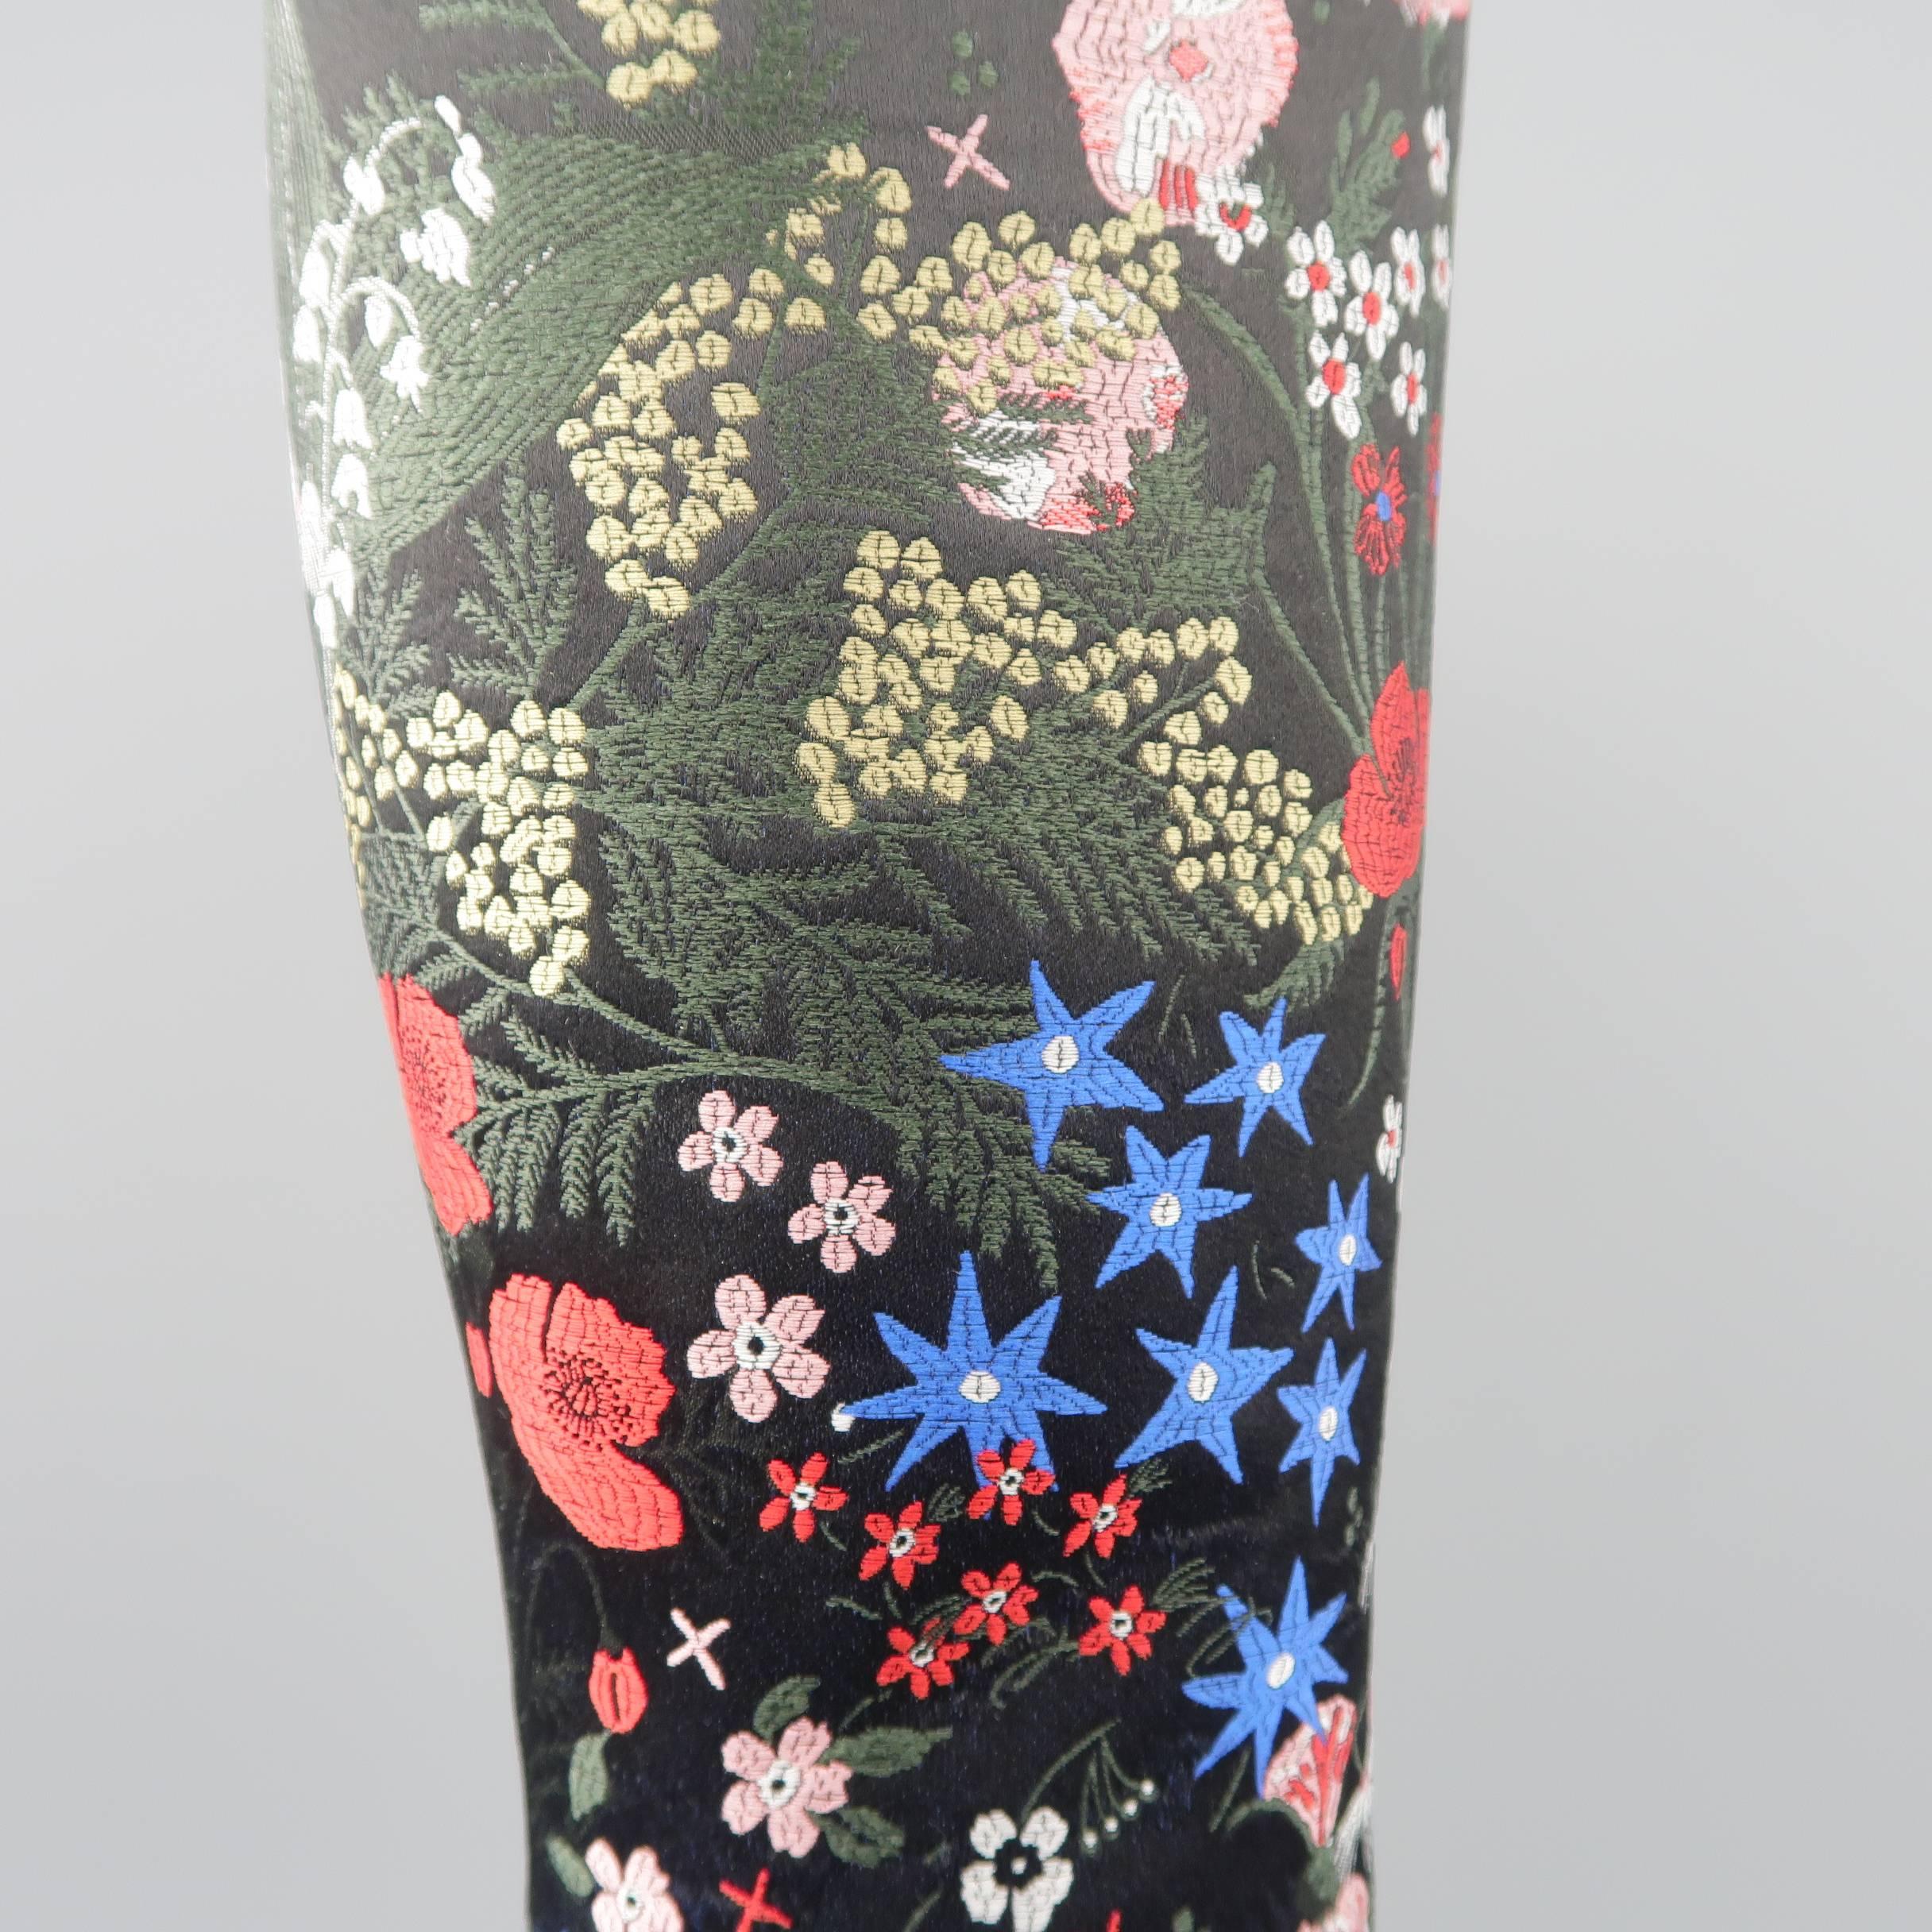 Valentino Boots - Pre-Fall 2015 Runway - Black MultiColor Floral Satin Knee High 2